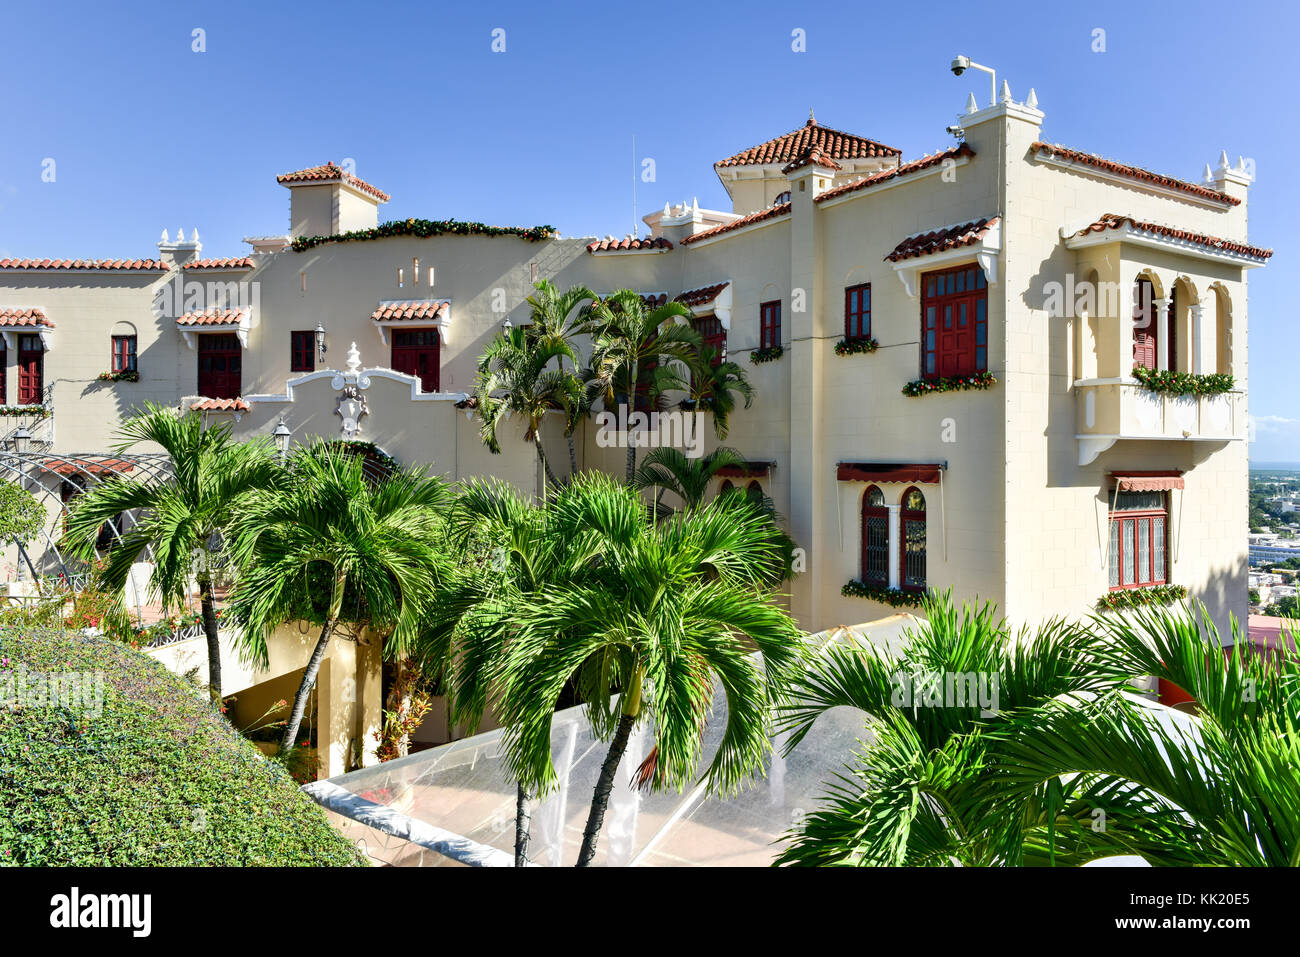 Castillo Serralles (Serralles Castle) is a mansion located in the city of Ponce, Puerto Rico, overlooking the downtown area (Ponce Pueblo). Stock Photo